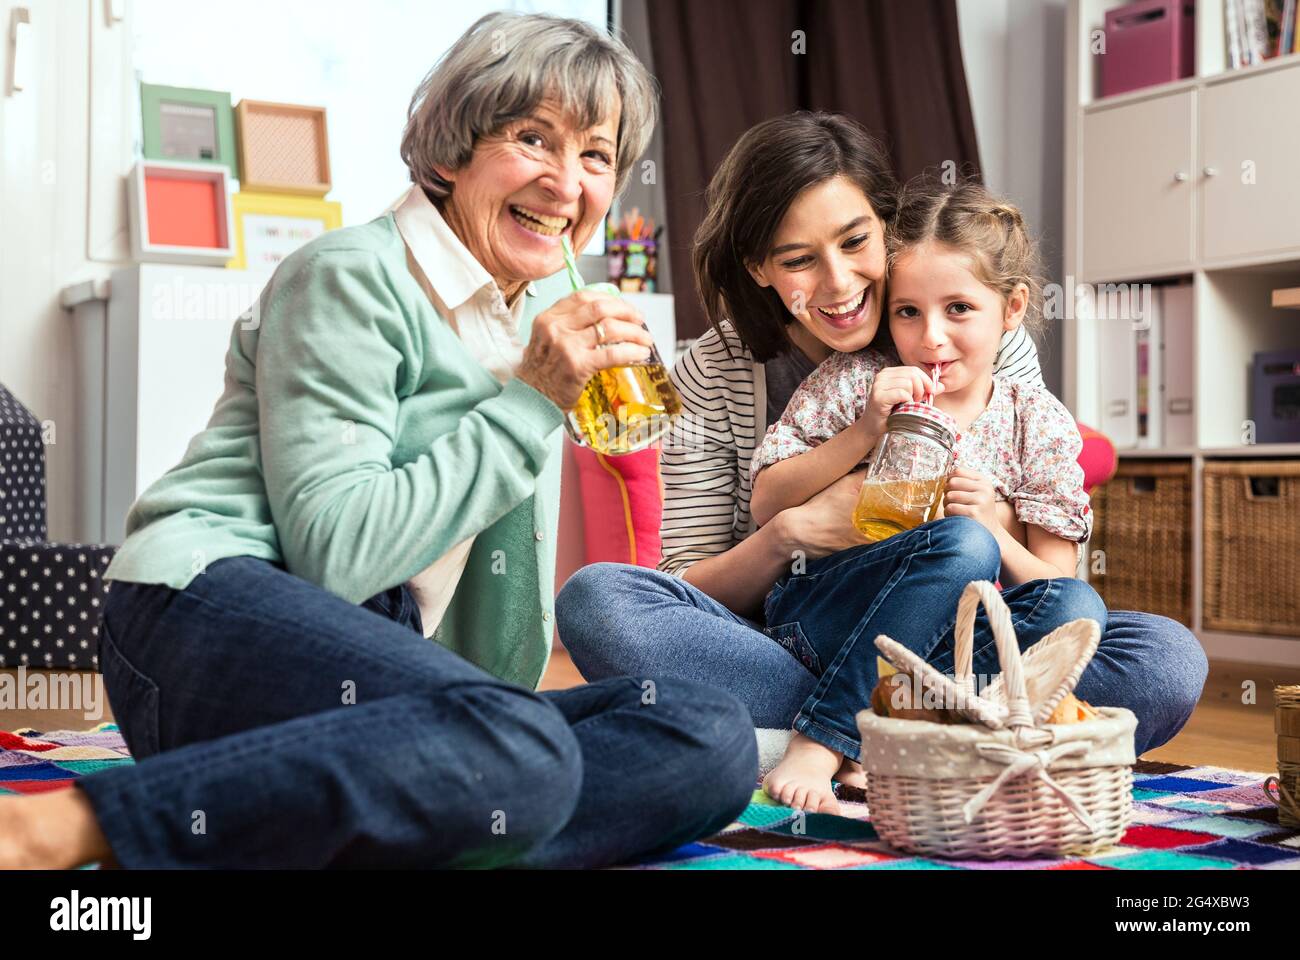 Multi-generation family playing picnic in nursery Stock Photo